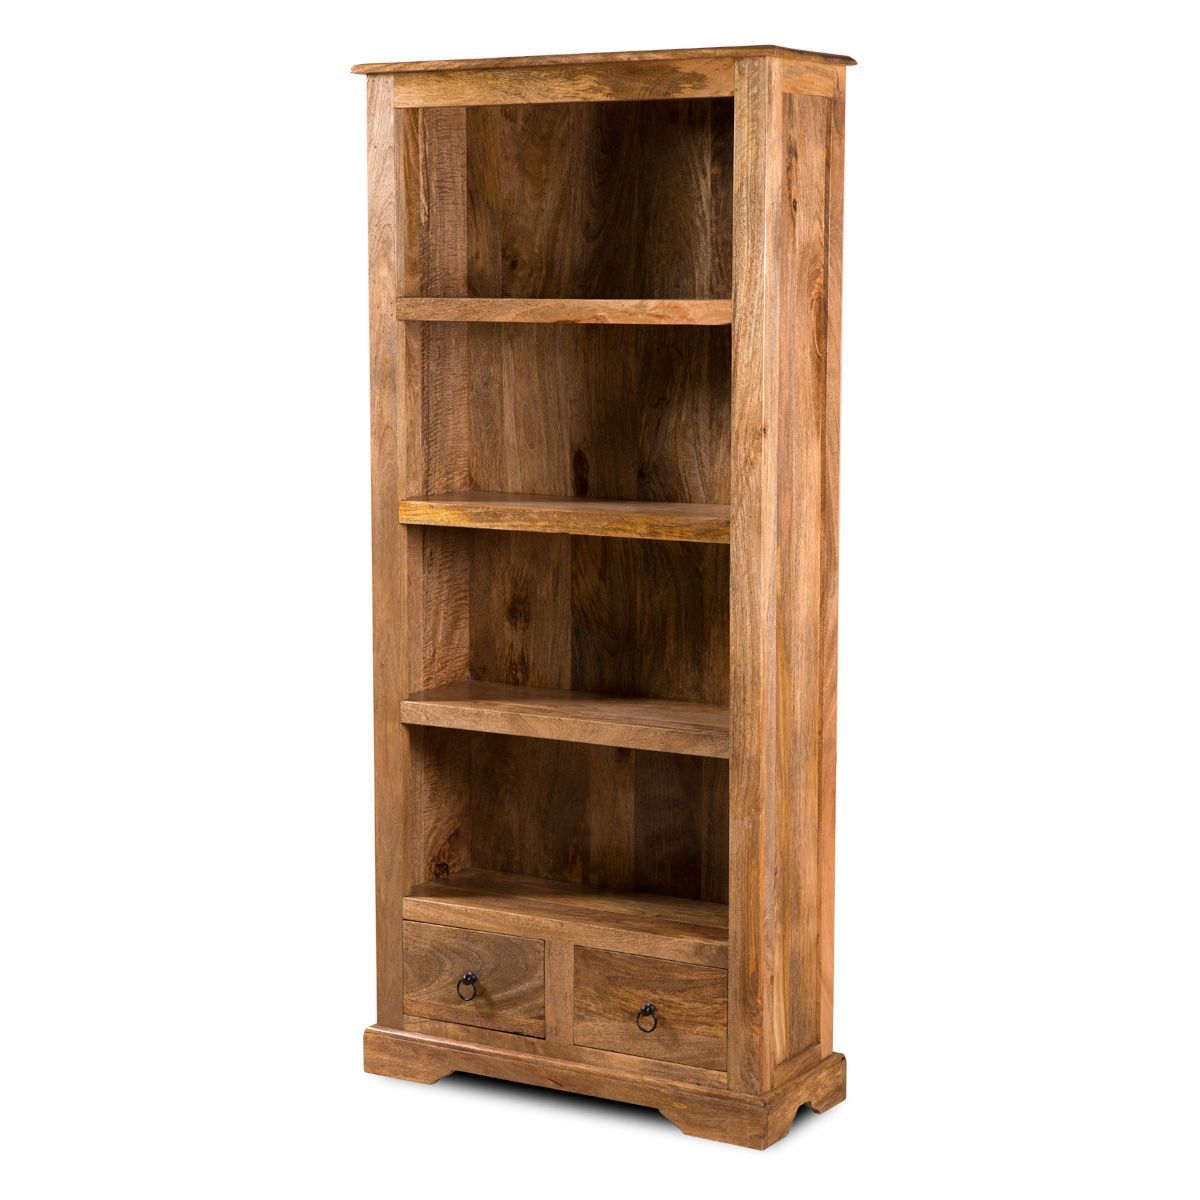 Solid Mango Wood Bookcase With Drawers | Casa Bella Indian Furniture |  Satara Furniture Uk Within Mango Wooden Bookcases (View 13 of 15)